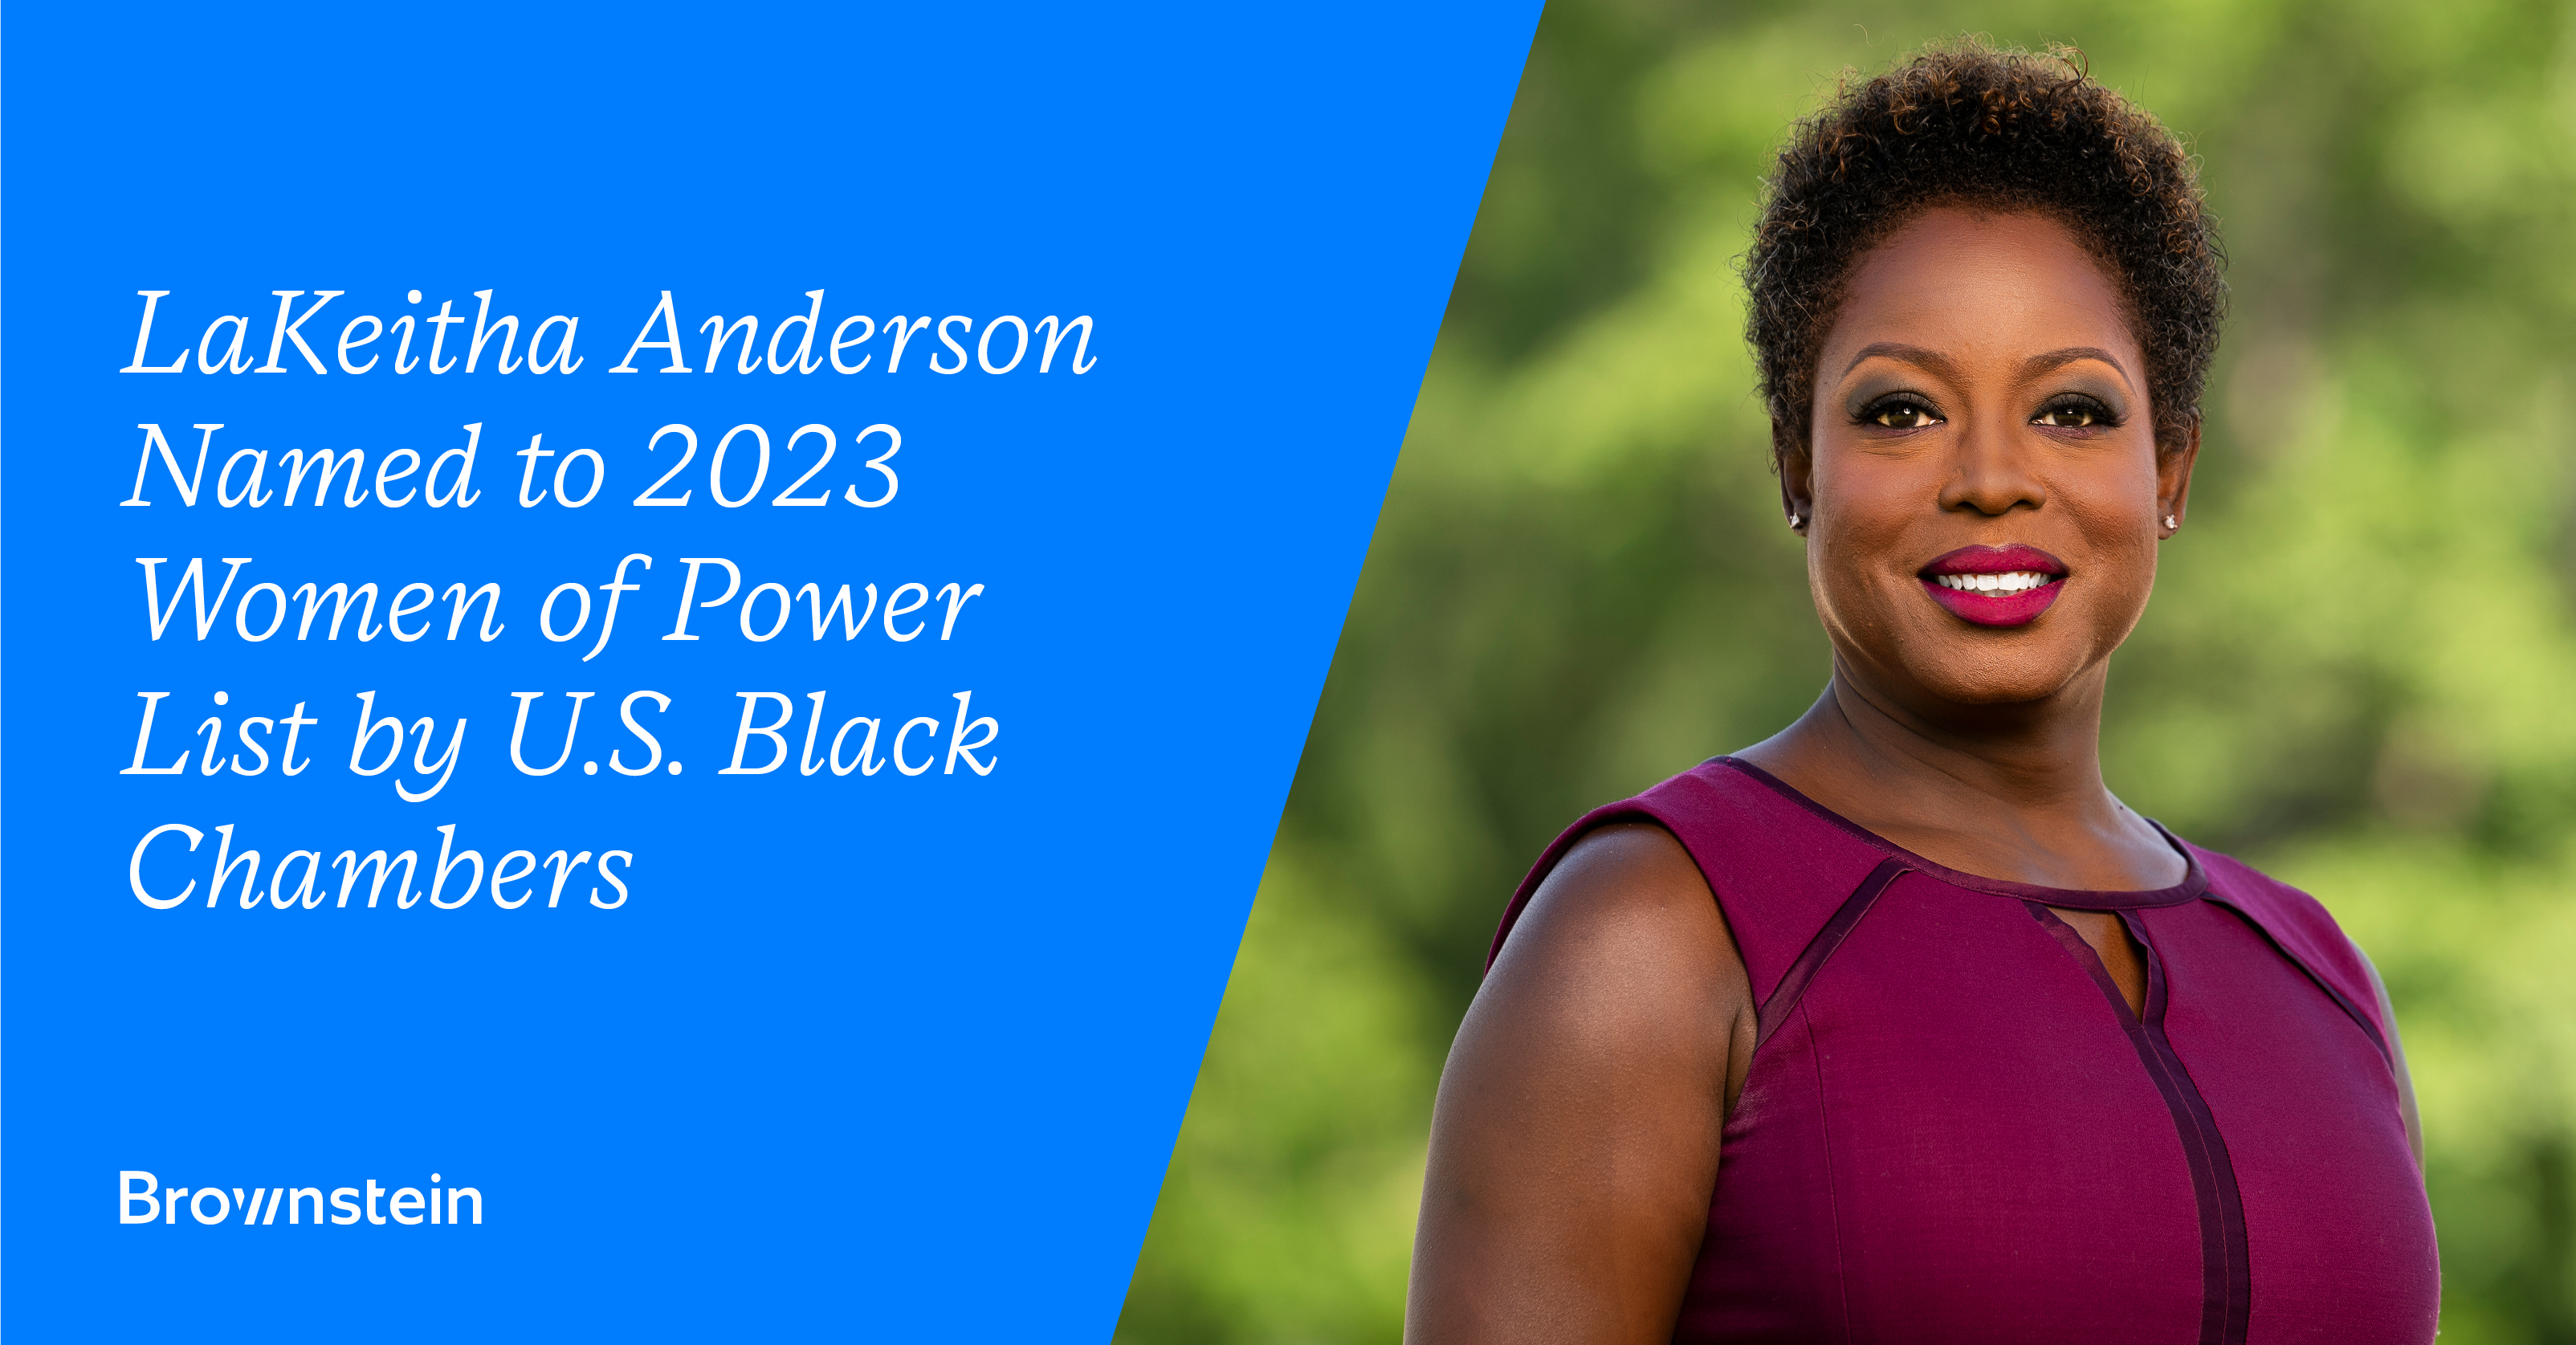 LaKeitha Anderson Named to 2023 Women of Power List by U.S. Black Chambers